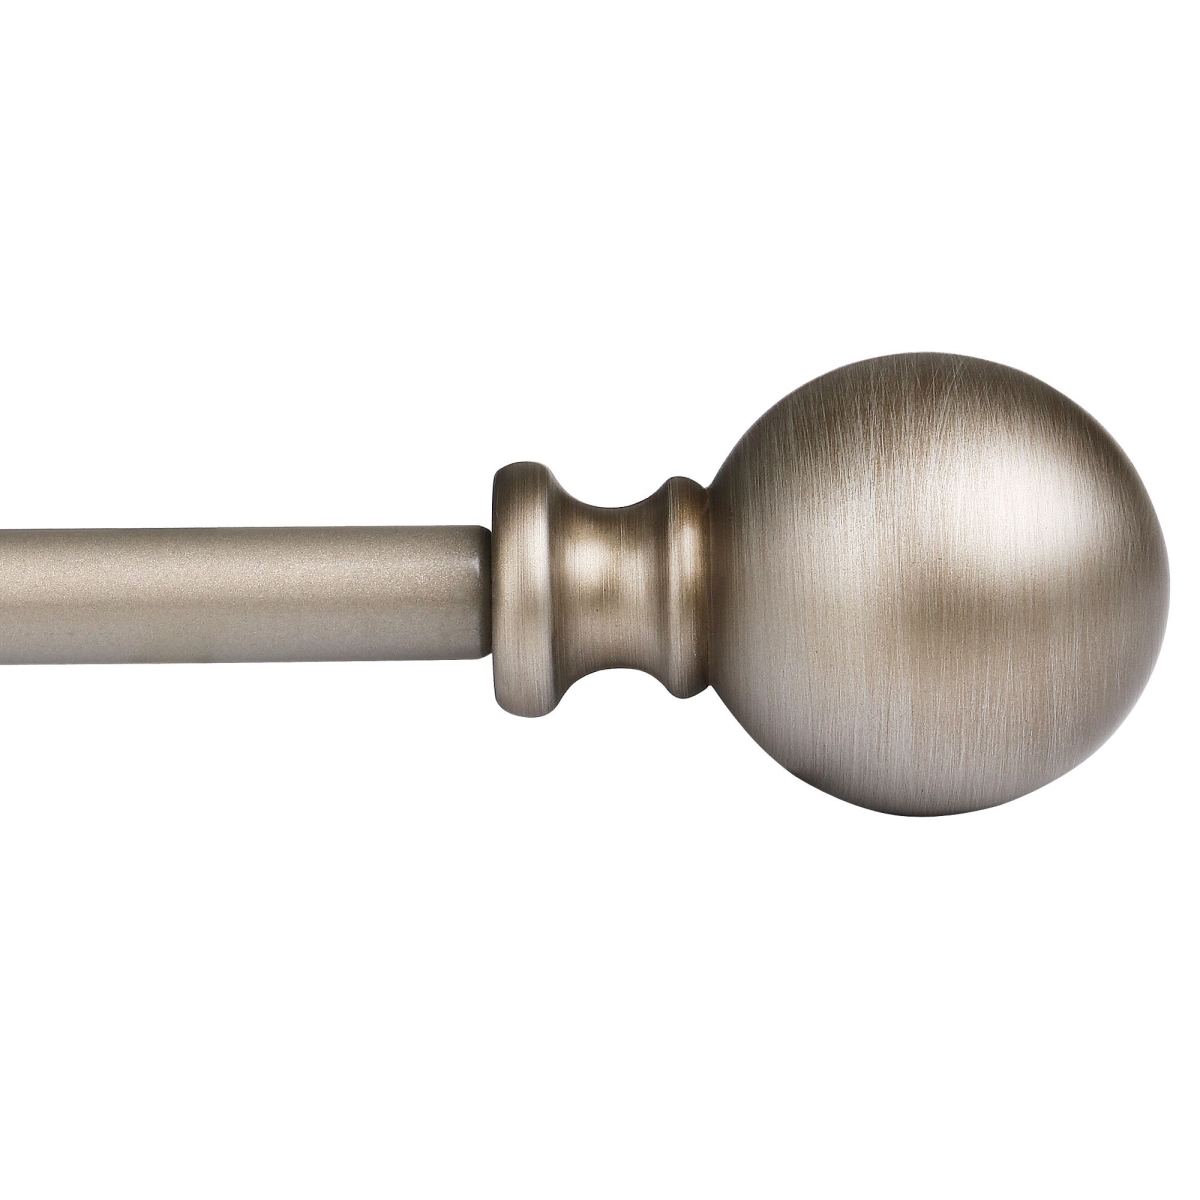 D38sn 86-120 In. Adjustable Curtain Rod With Round Finials - Satin Nickel